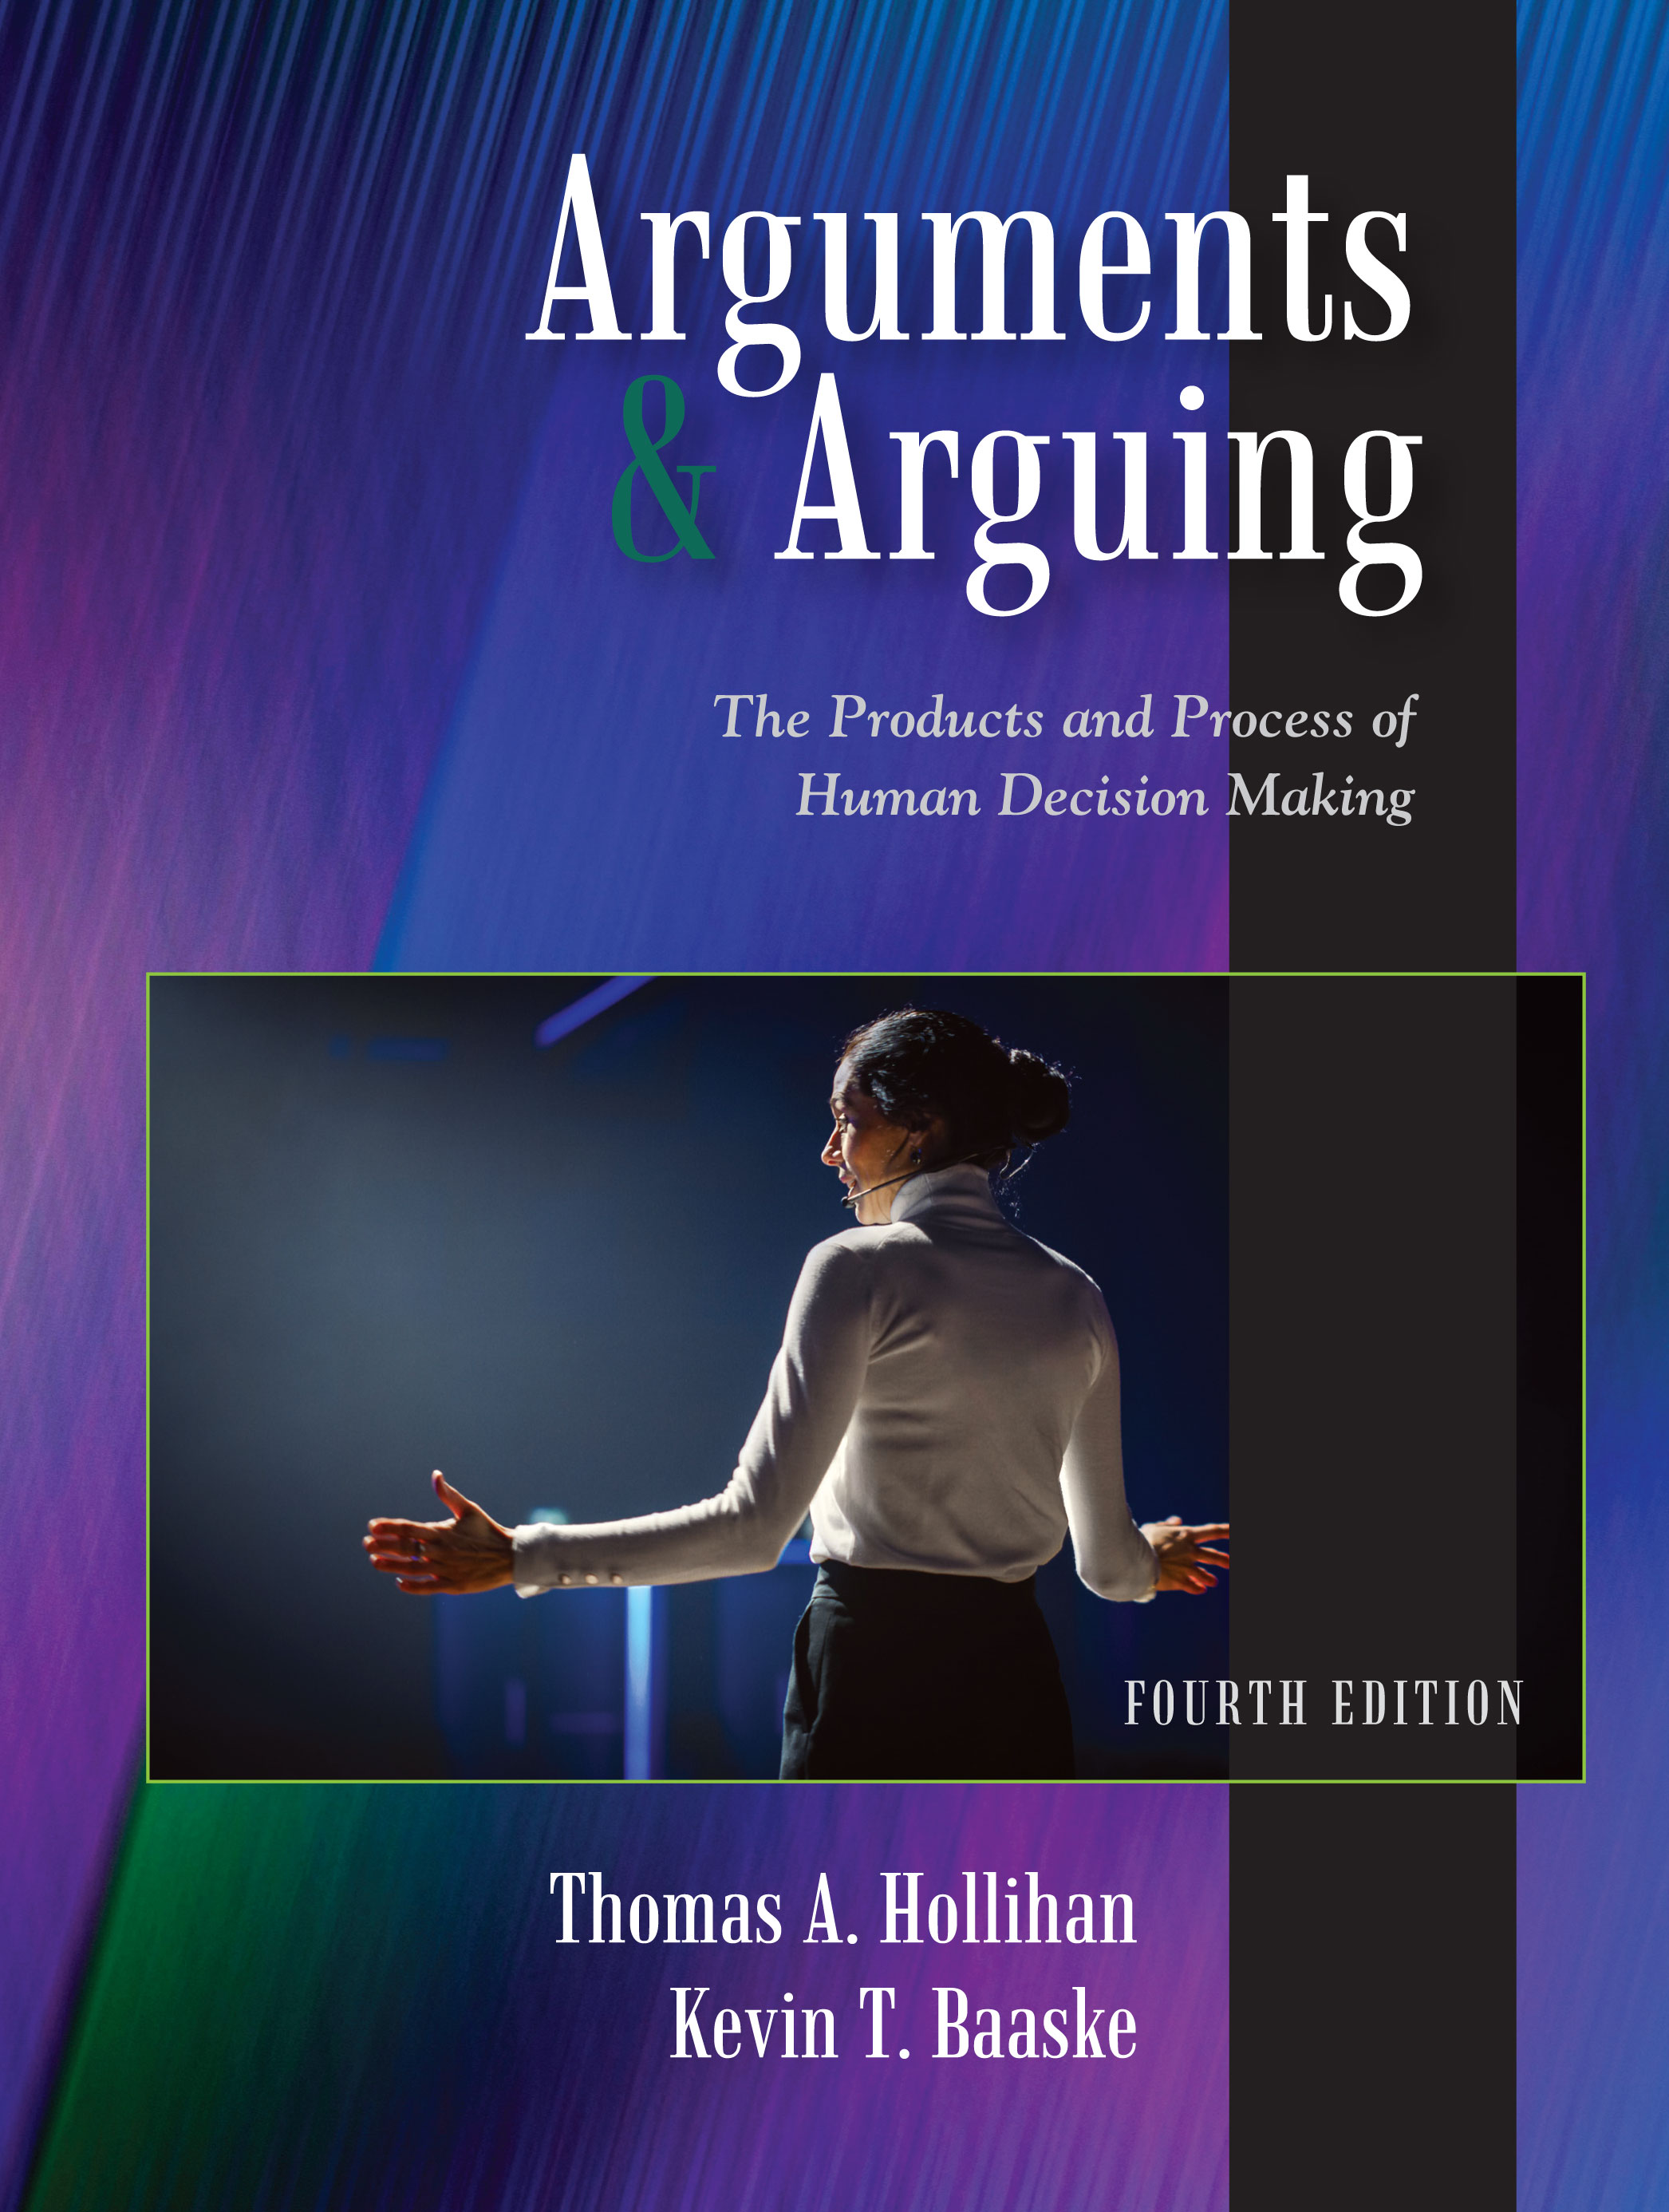 Arguments and Arguing: The Products and Process of Human Decision Making by Thomas A. Hollihan, Kevin T. Baaske